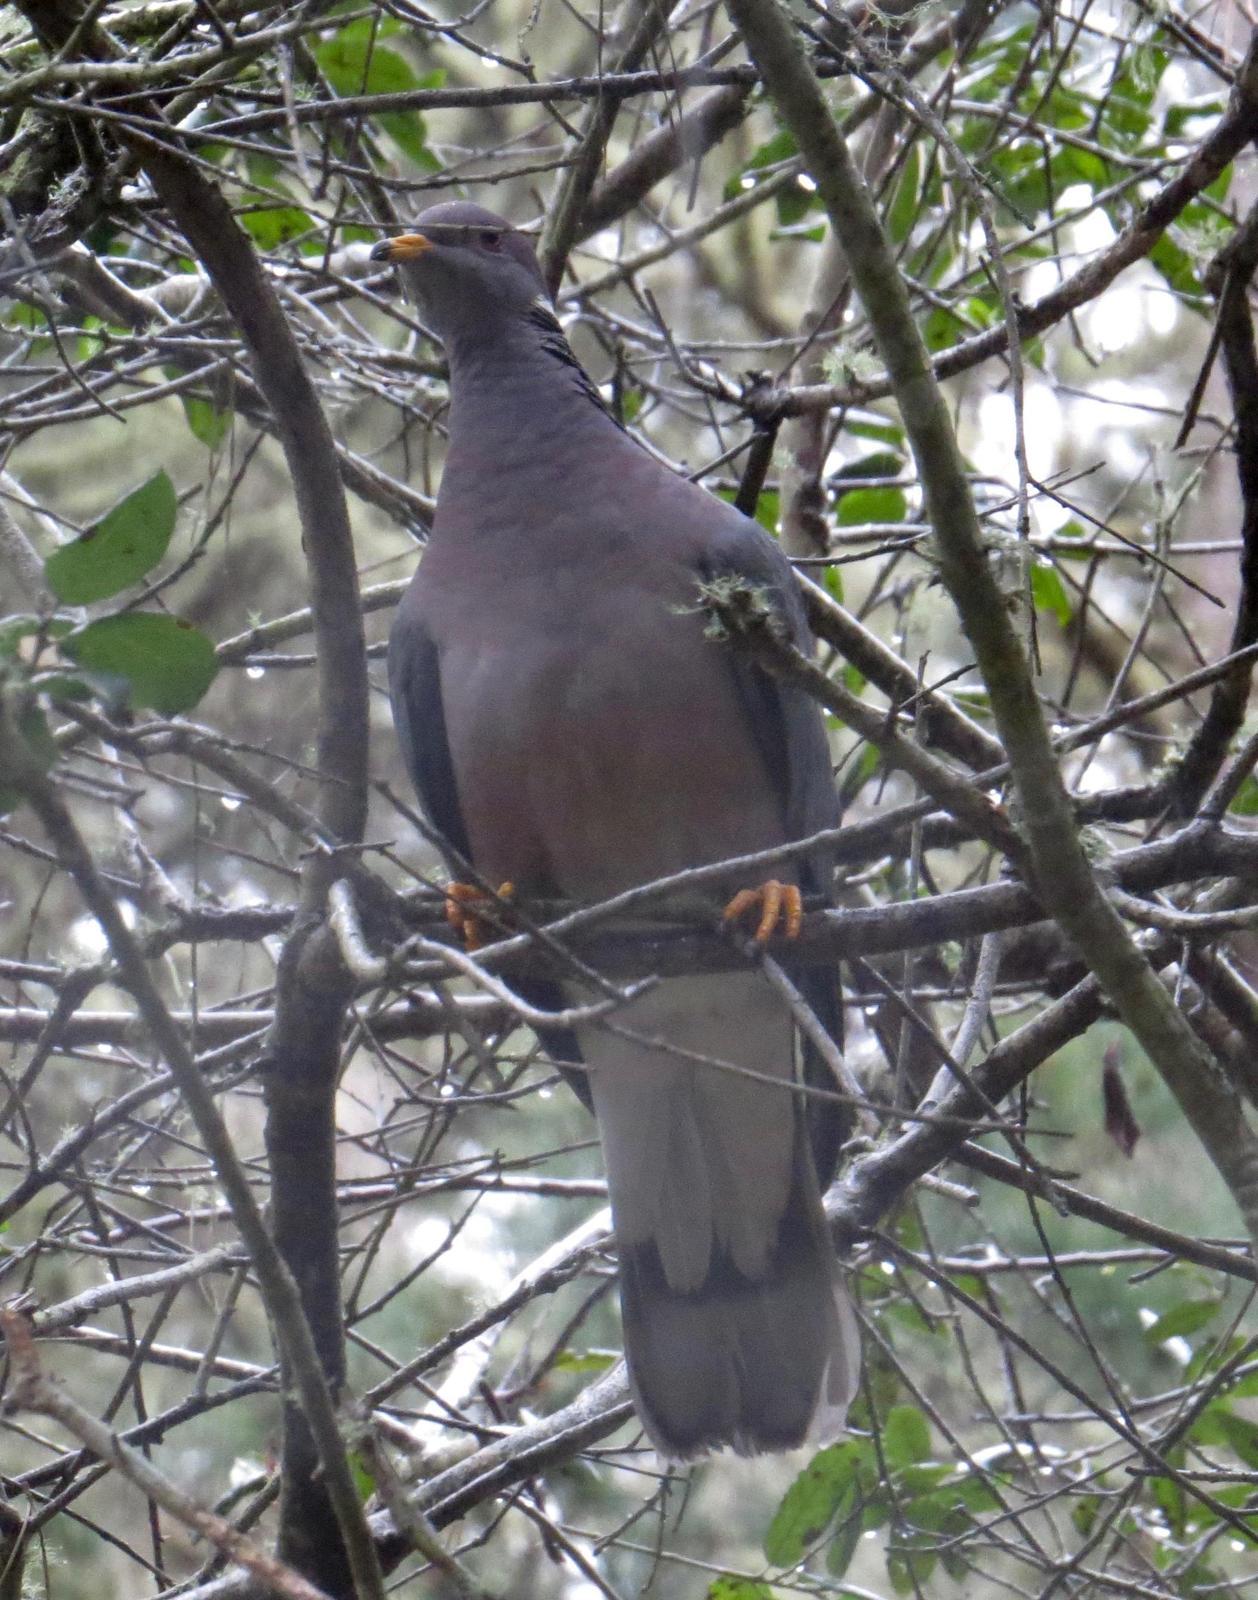 Band-tailed Pigeon Photo by Don Glasco